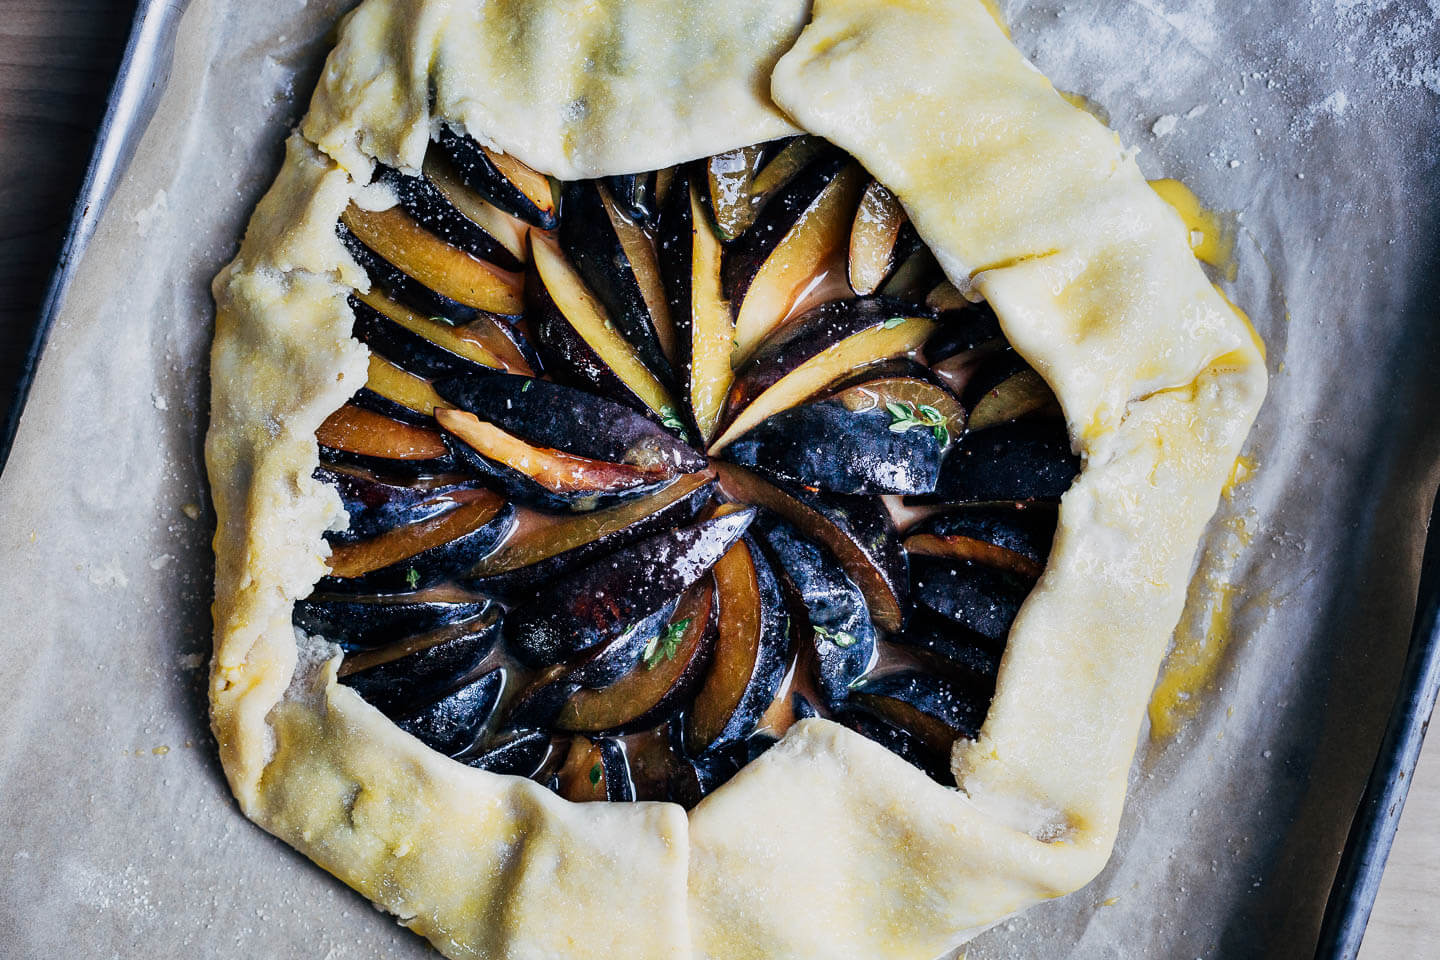 Plum galette, ready for the oven.